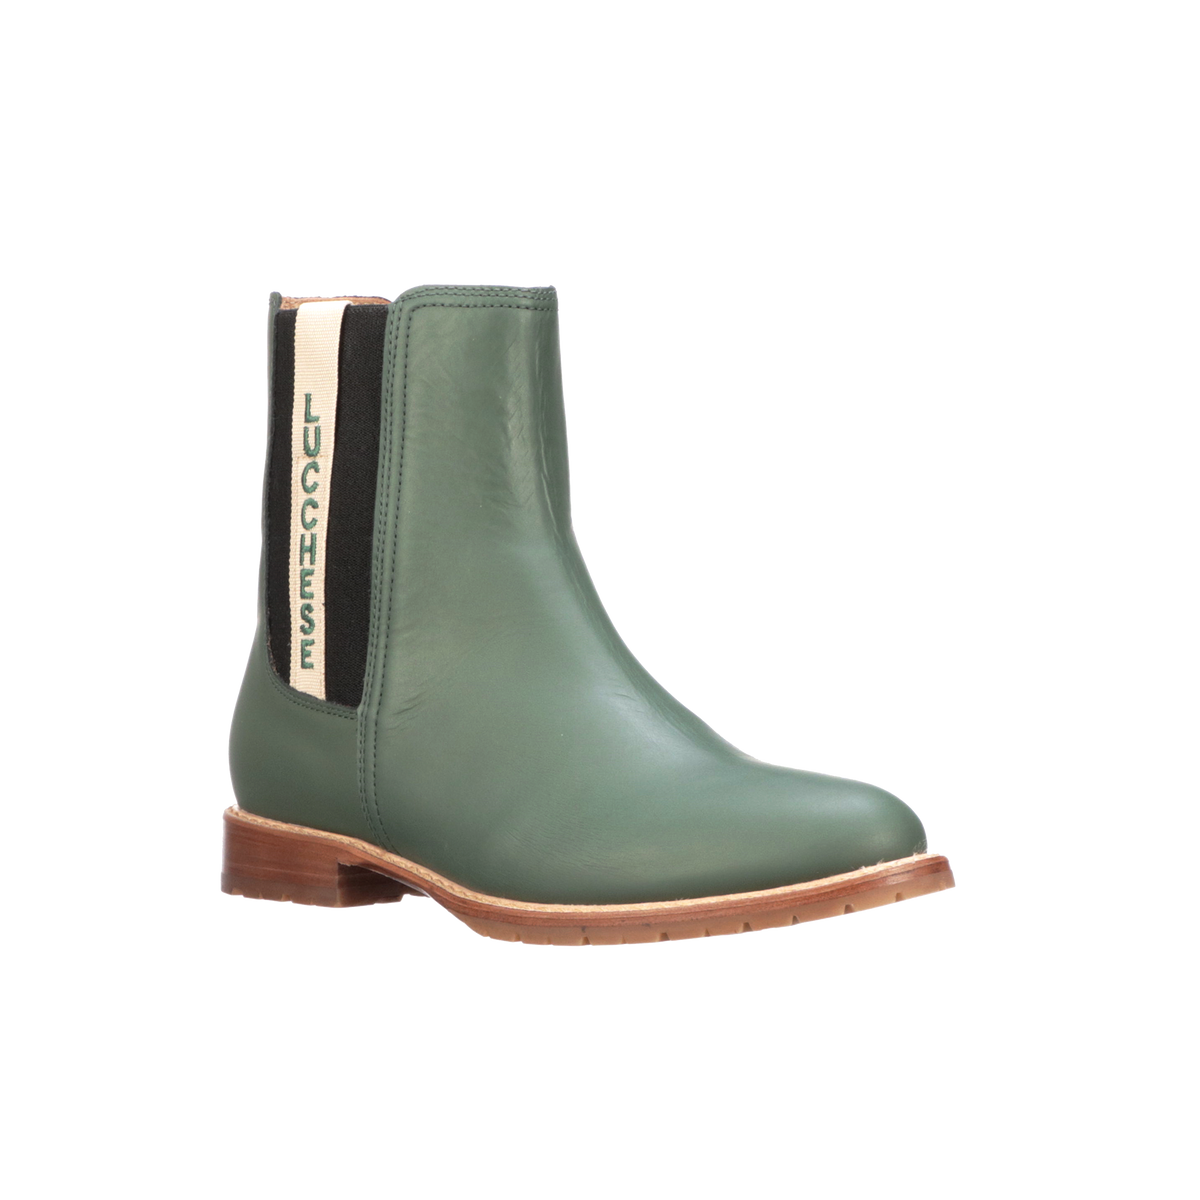 All-Weather Ladies Garden Boot :: Military Green + Black